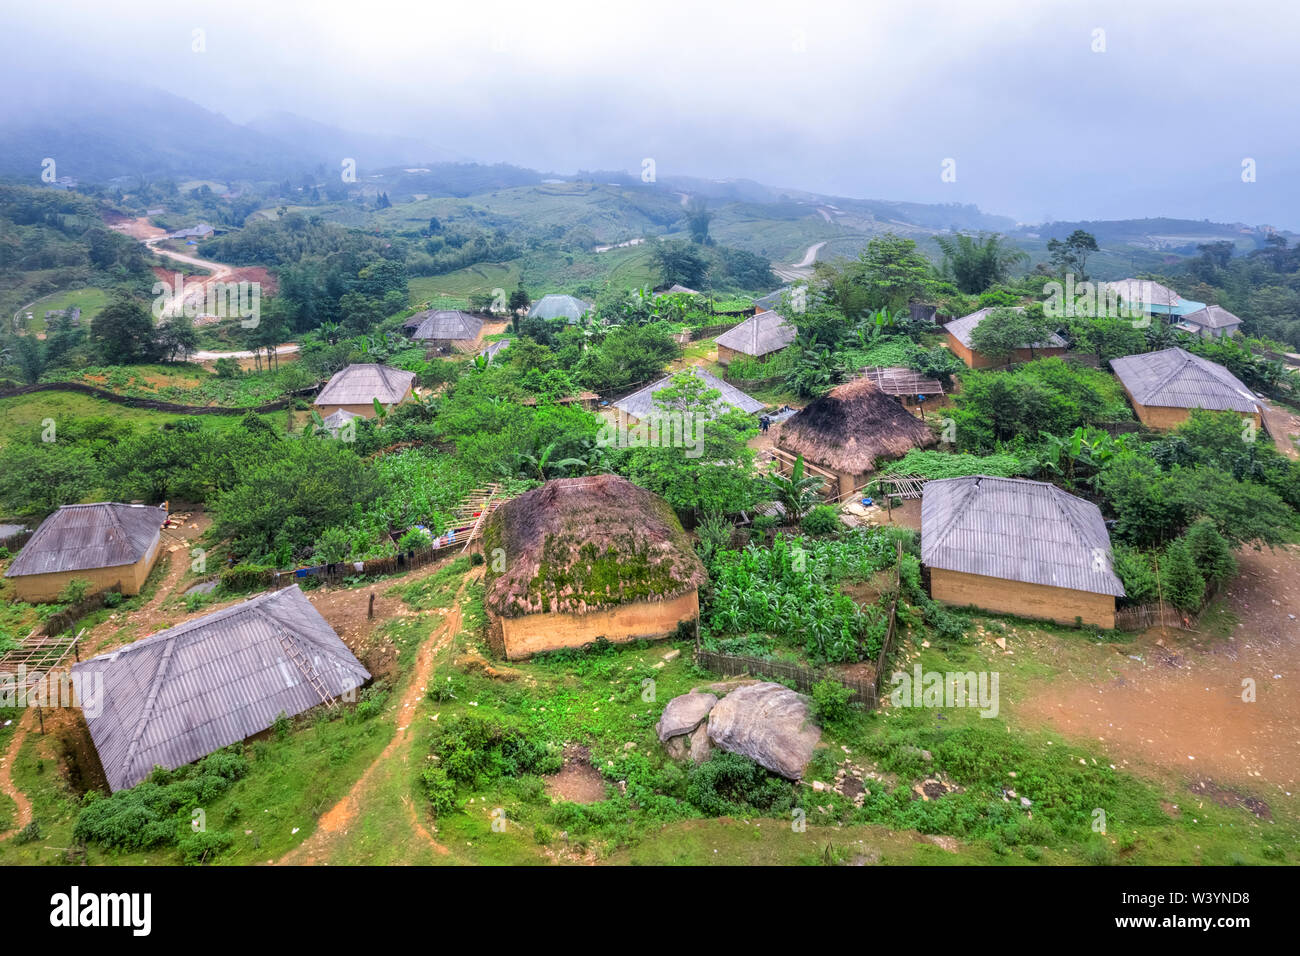 Aerial view of Trinh Tuong house or house made of land of ethnic minorities in Y Ty, Lao Cai, Vietnam. This is the traditional house of Ha Nhi people. Stock Photo